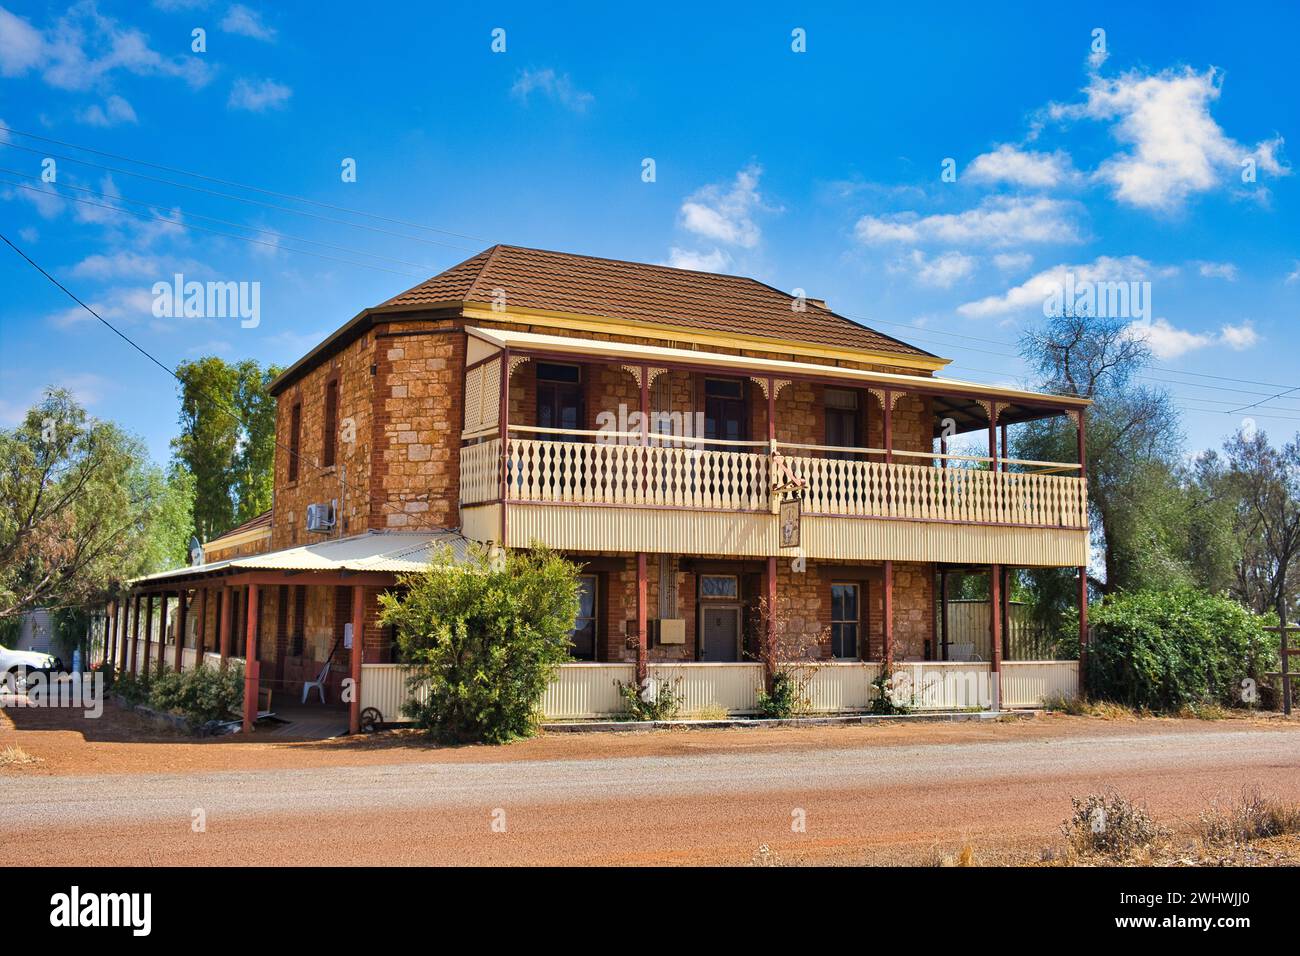 The well preserved heritage Pindar Hotel (1907) in the small outback town of Pindar, Greater Geraldton, Western Australia Stock Photo